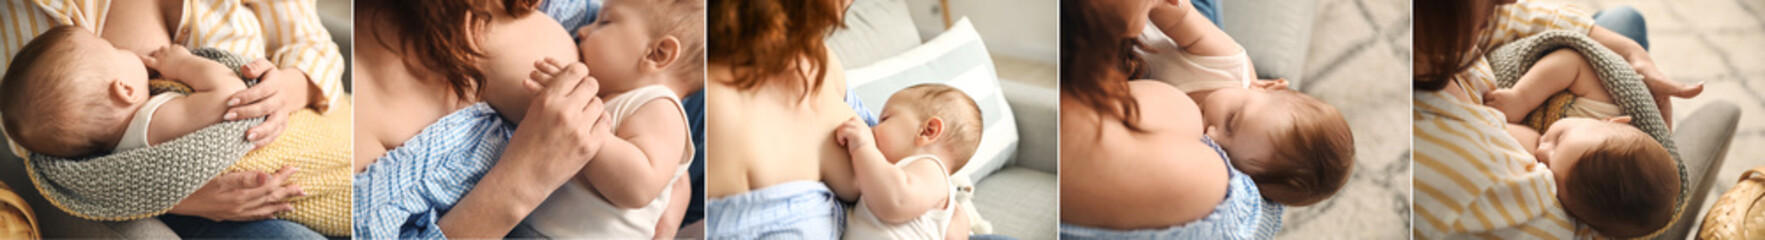 Collage of woman breastfeeding her baby at home, closeup